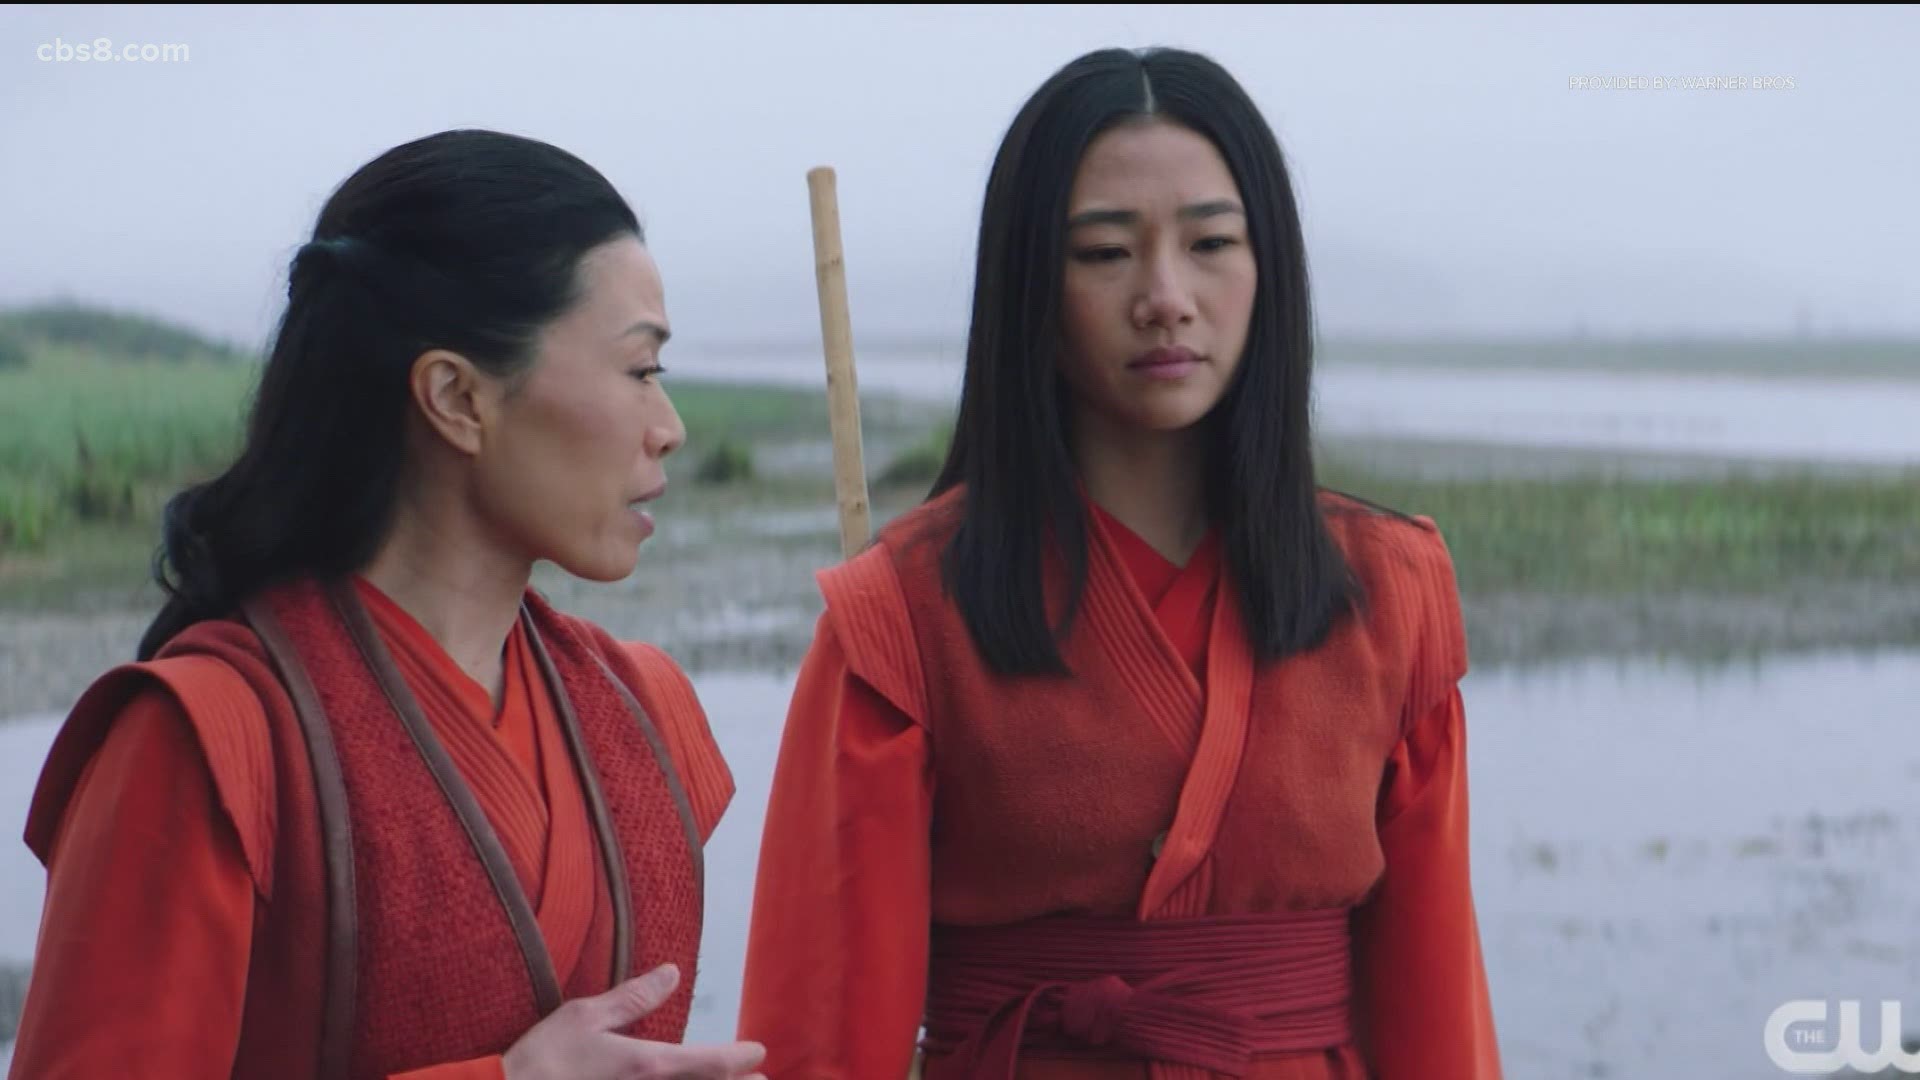 With a modern twist to the 1972 classic, "Kung Fu" features an Asian-American heroine who uses her martial arts skills to save her family and her community.